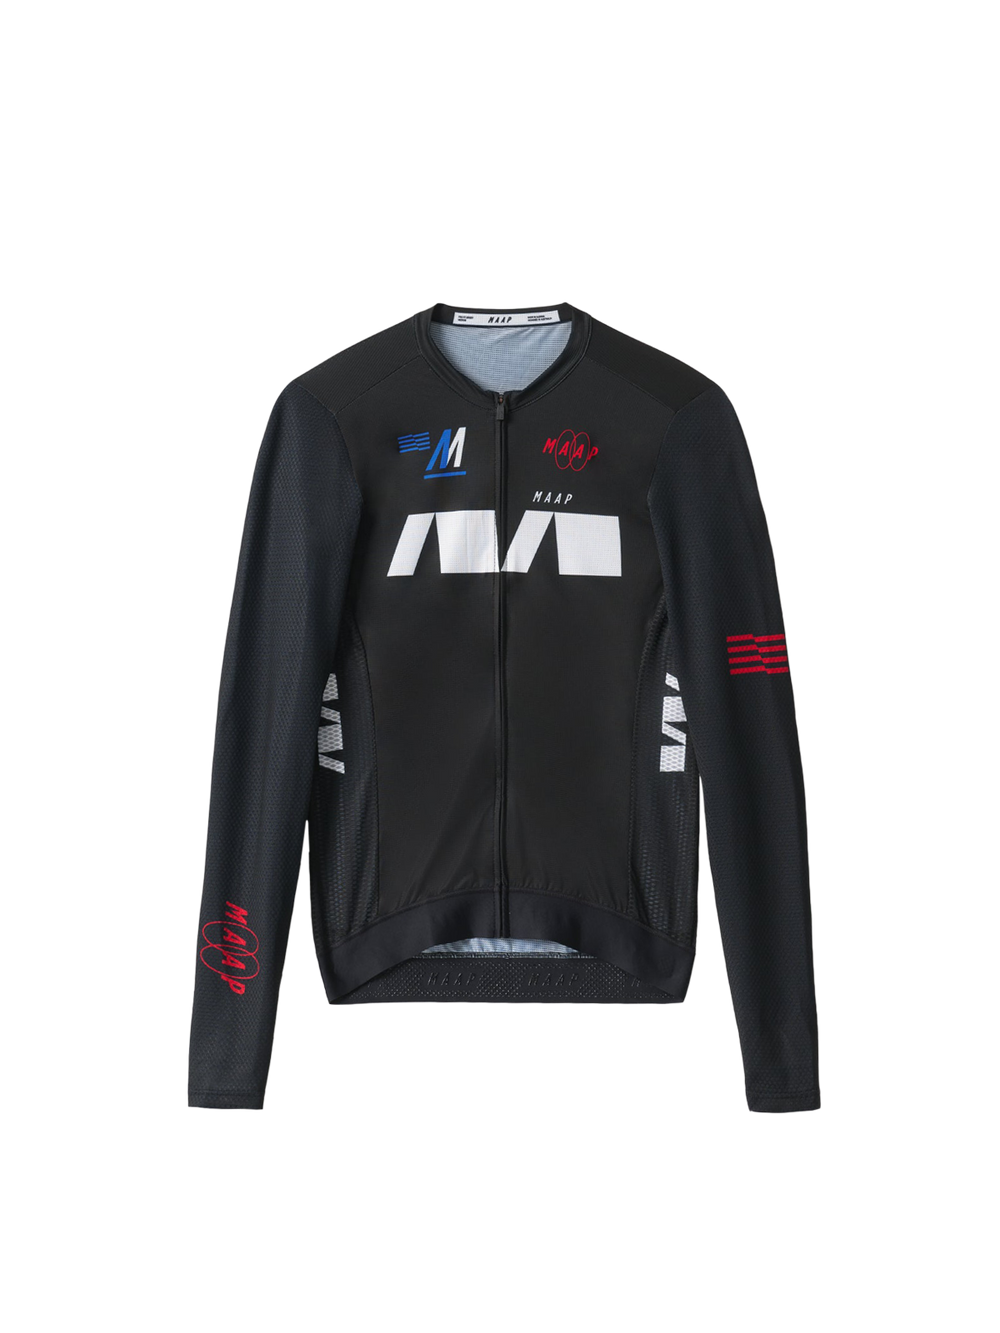 Product Image for Trace Pro Air LS Jersey